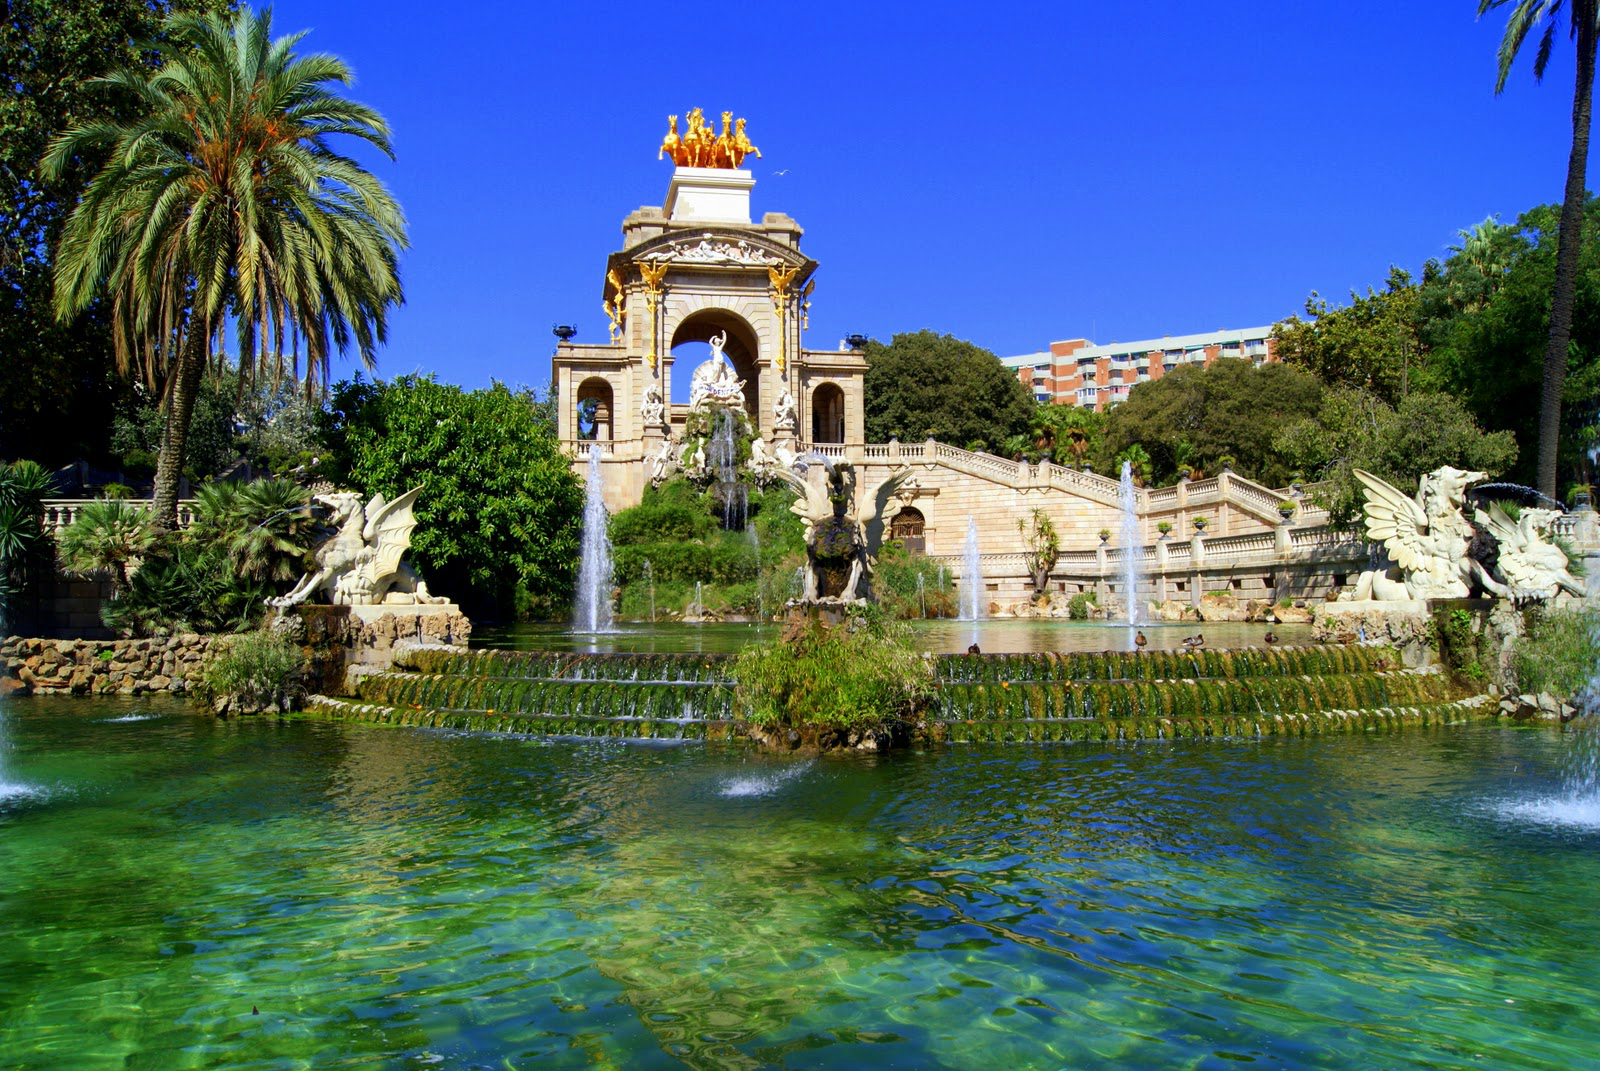 Top 6 Parks in Barcelona – Park Güell is overrated! Image